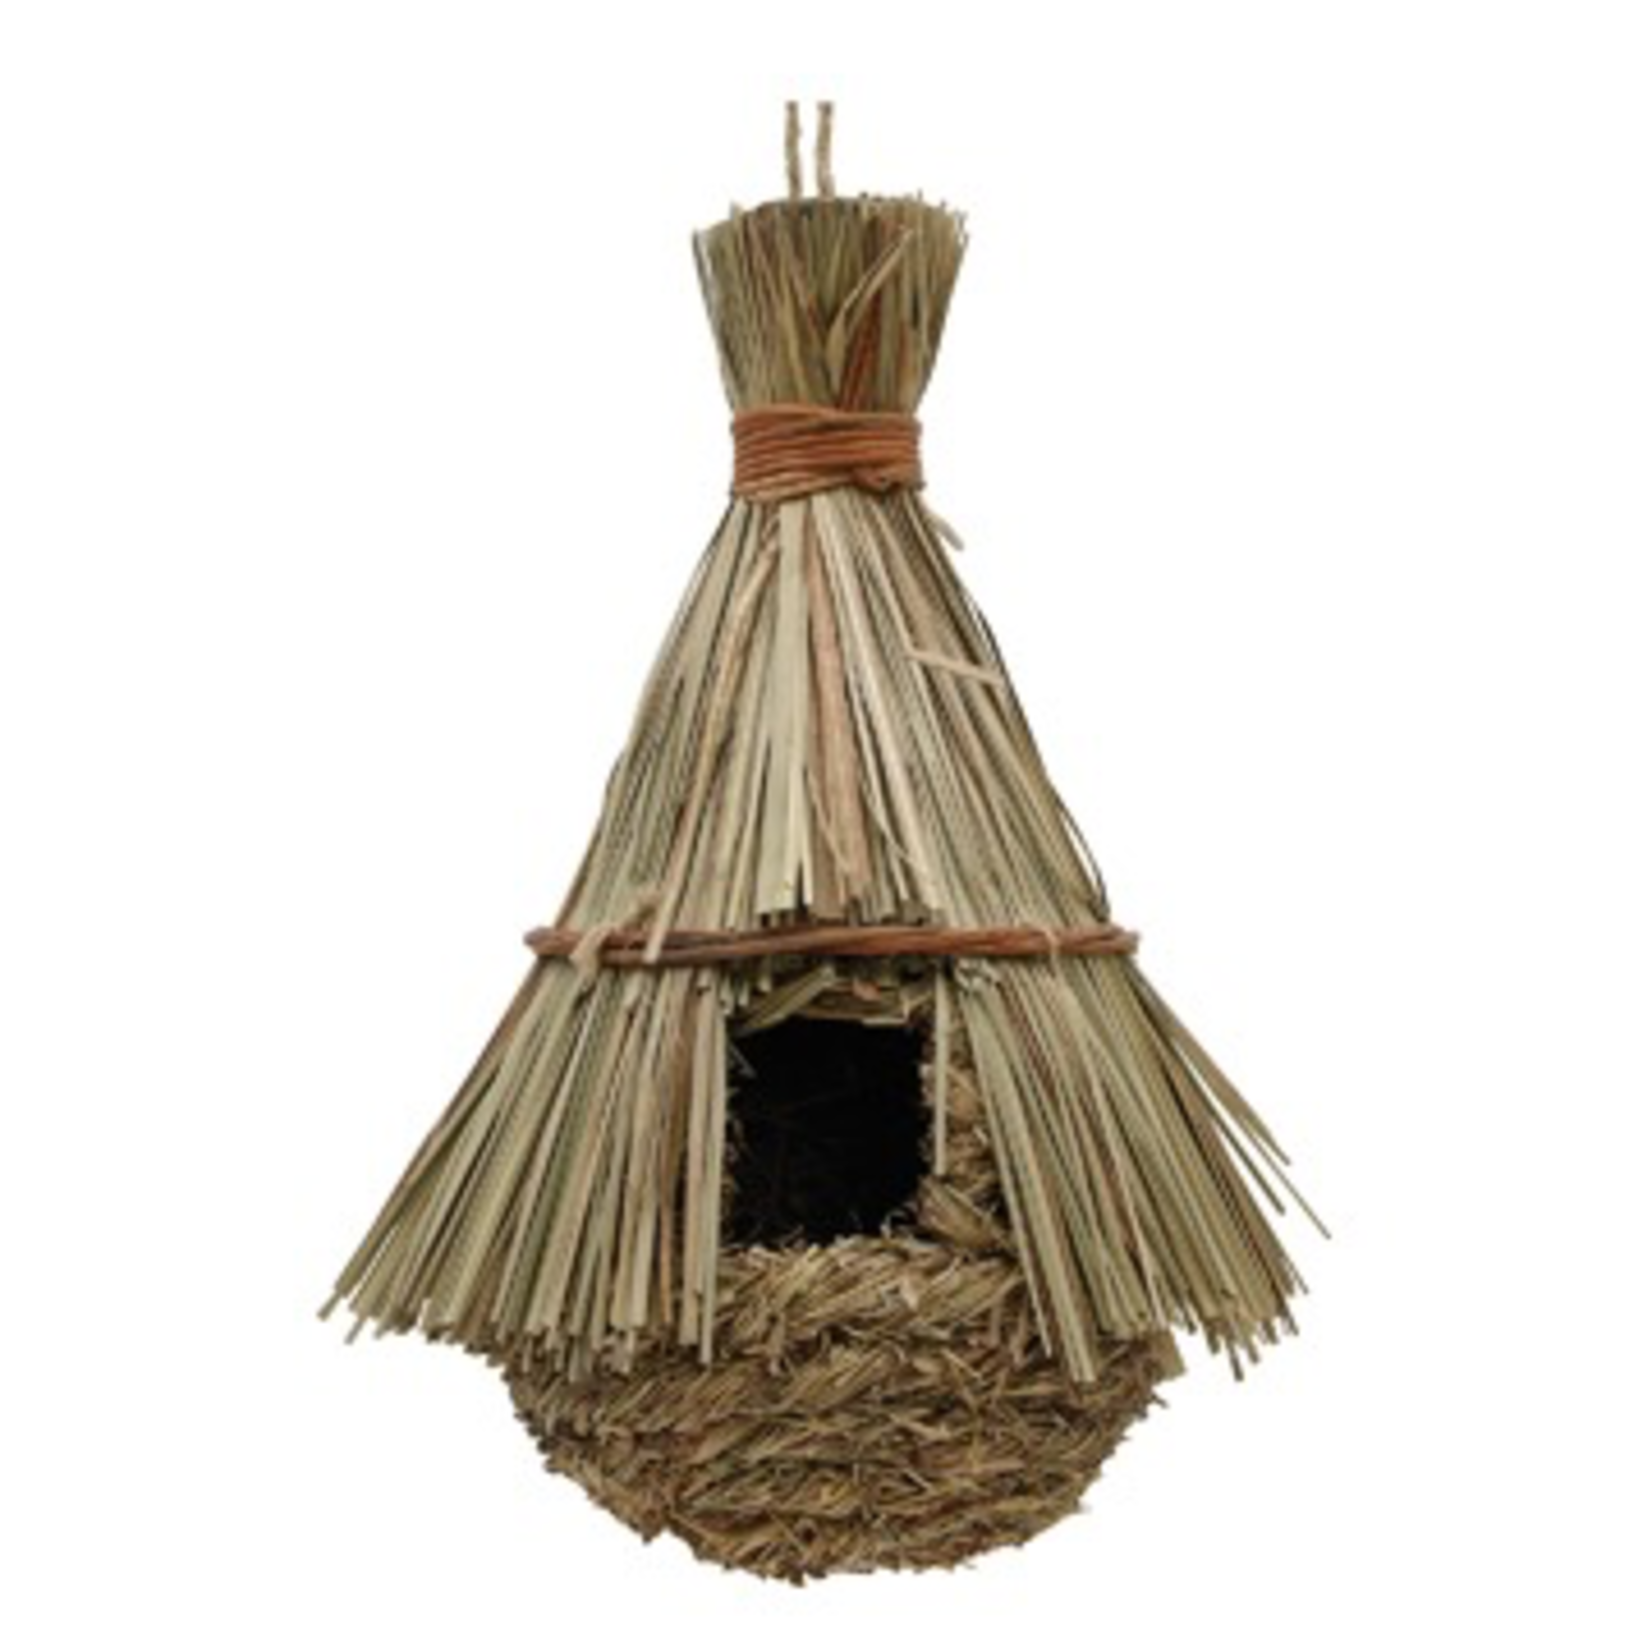 LIVING WORLD (D) Living World Outdoor Bird Nest - Reed with Orchard Grass - Hut - 21.5 cm x 21.5 cm x 31 cm (8.5'' x 8.5'' x 12.2in in)